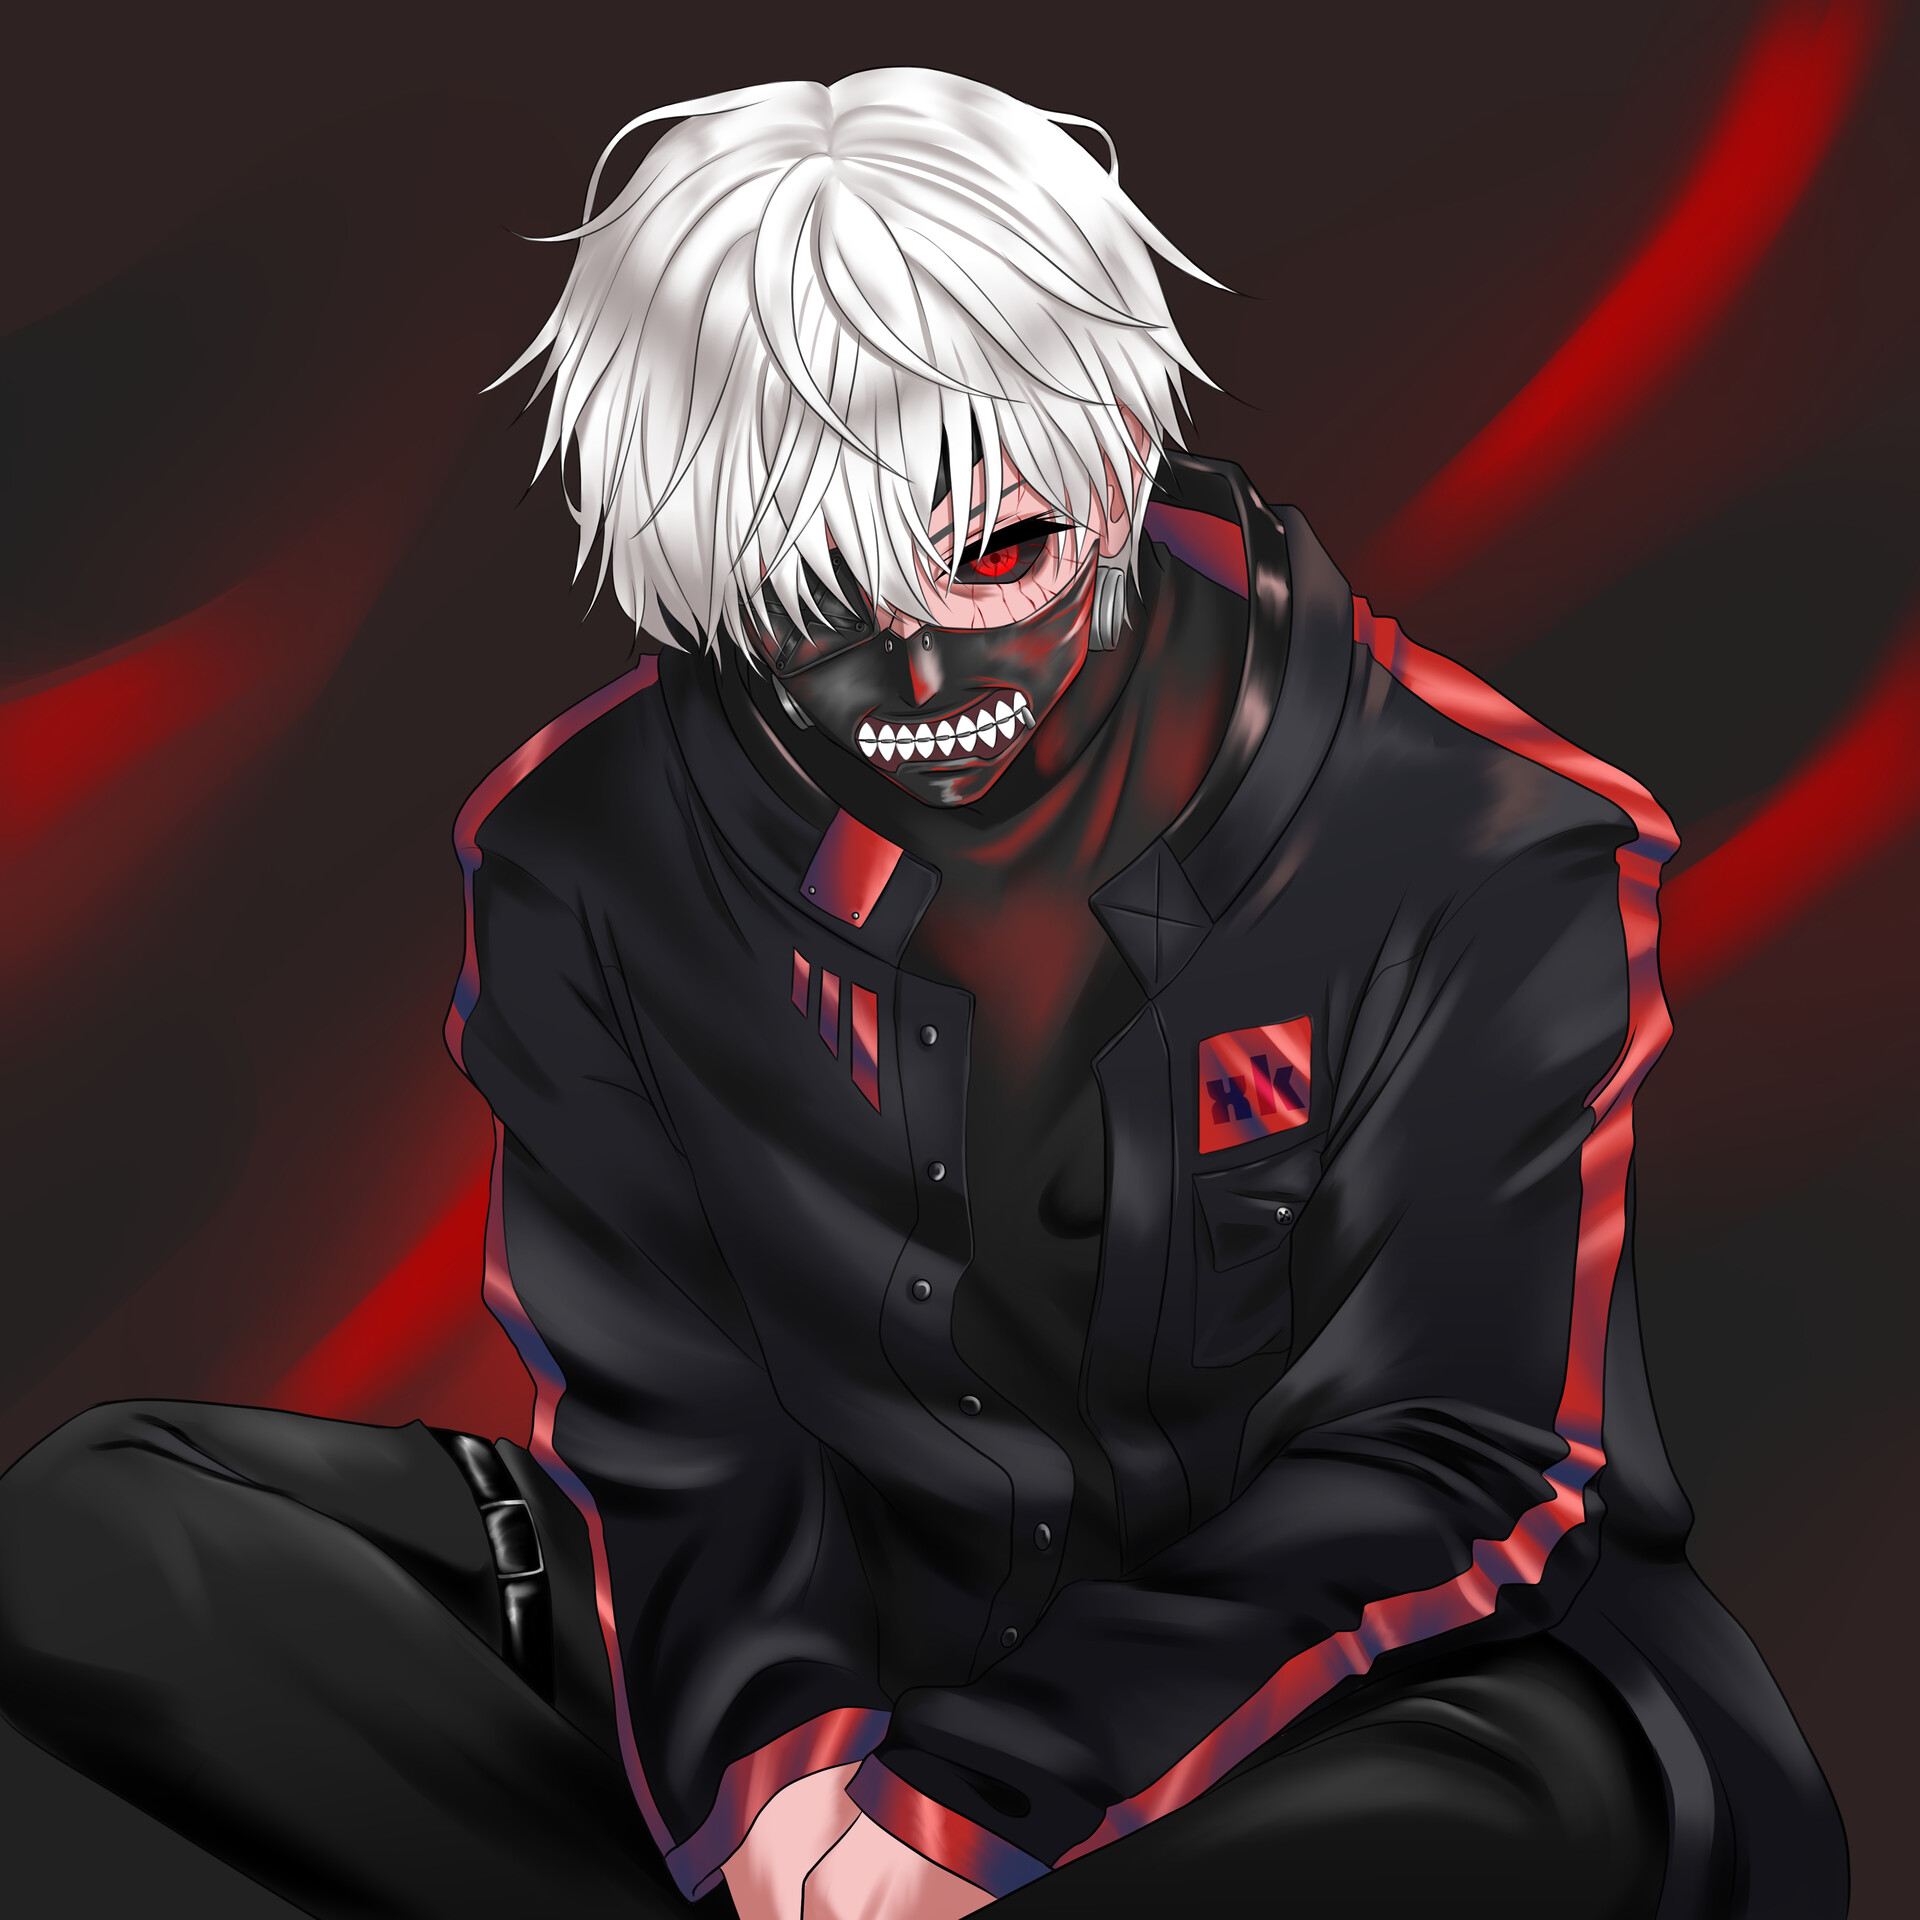 My take on Kaneki Ken from Tokyo Ghoul with some modern cloths.